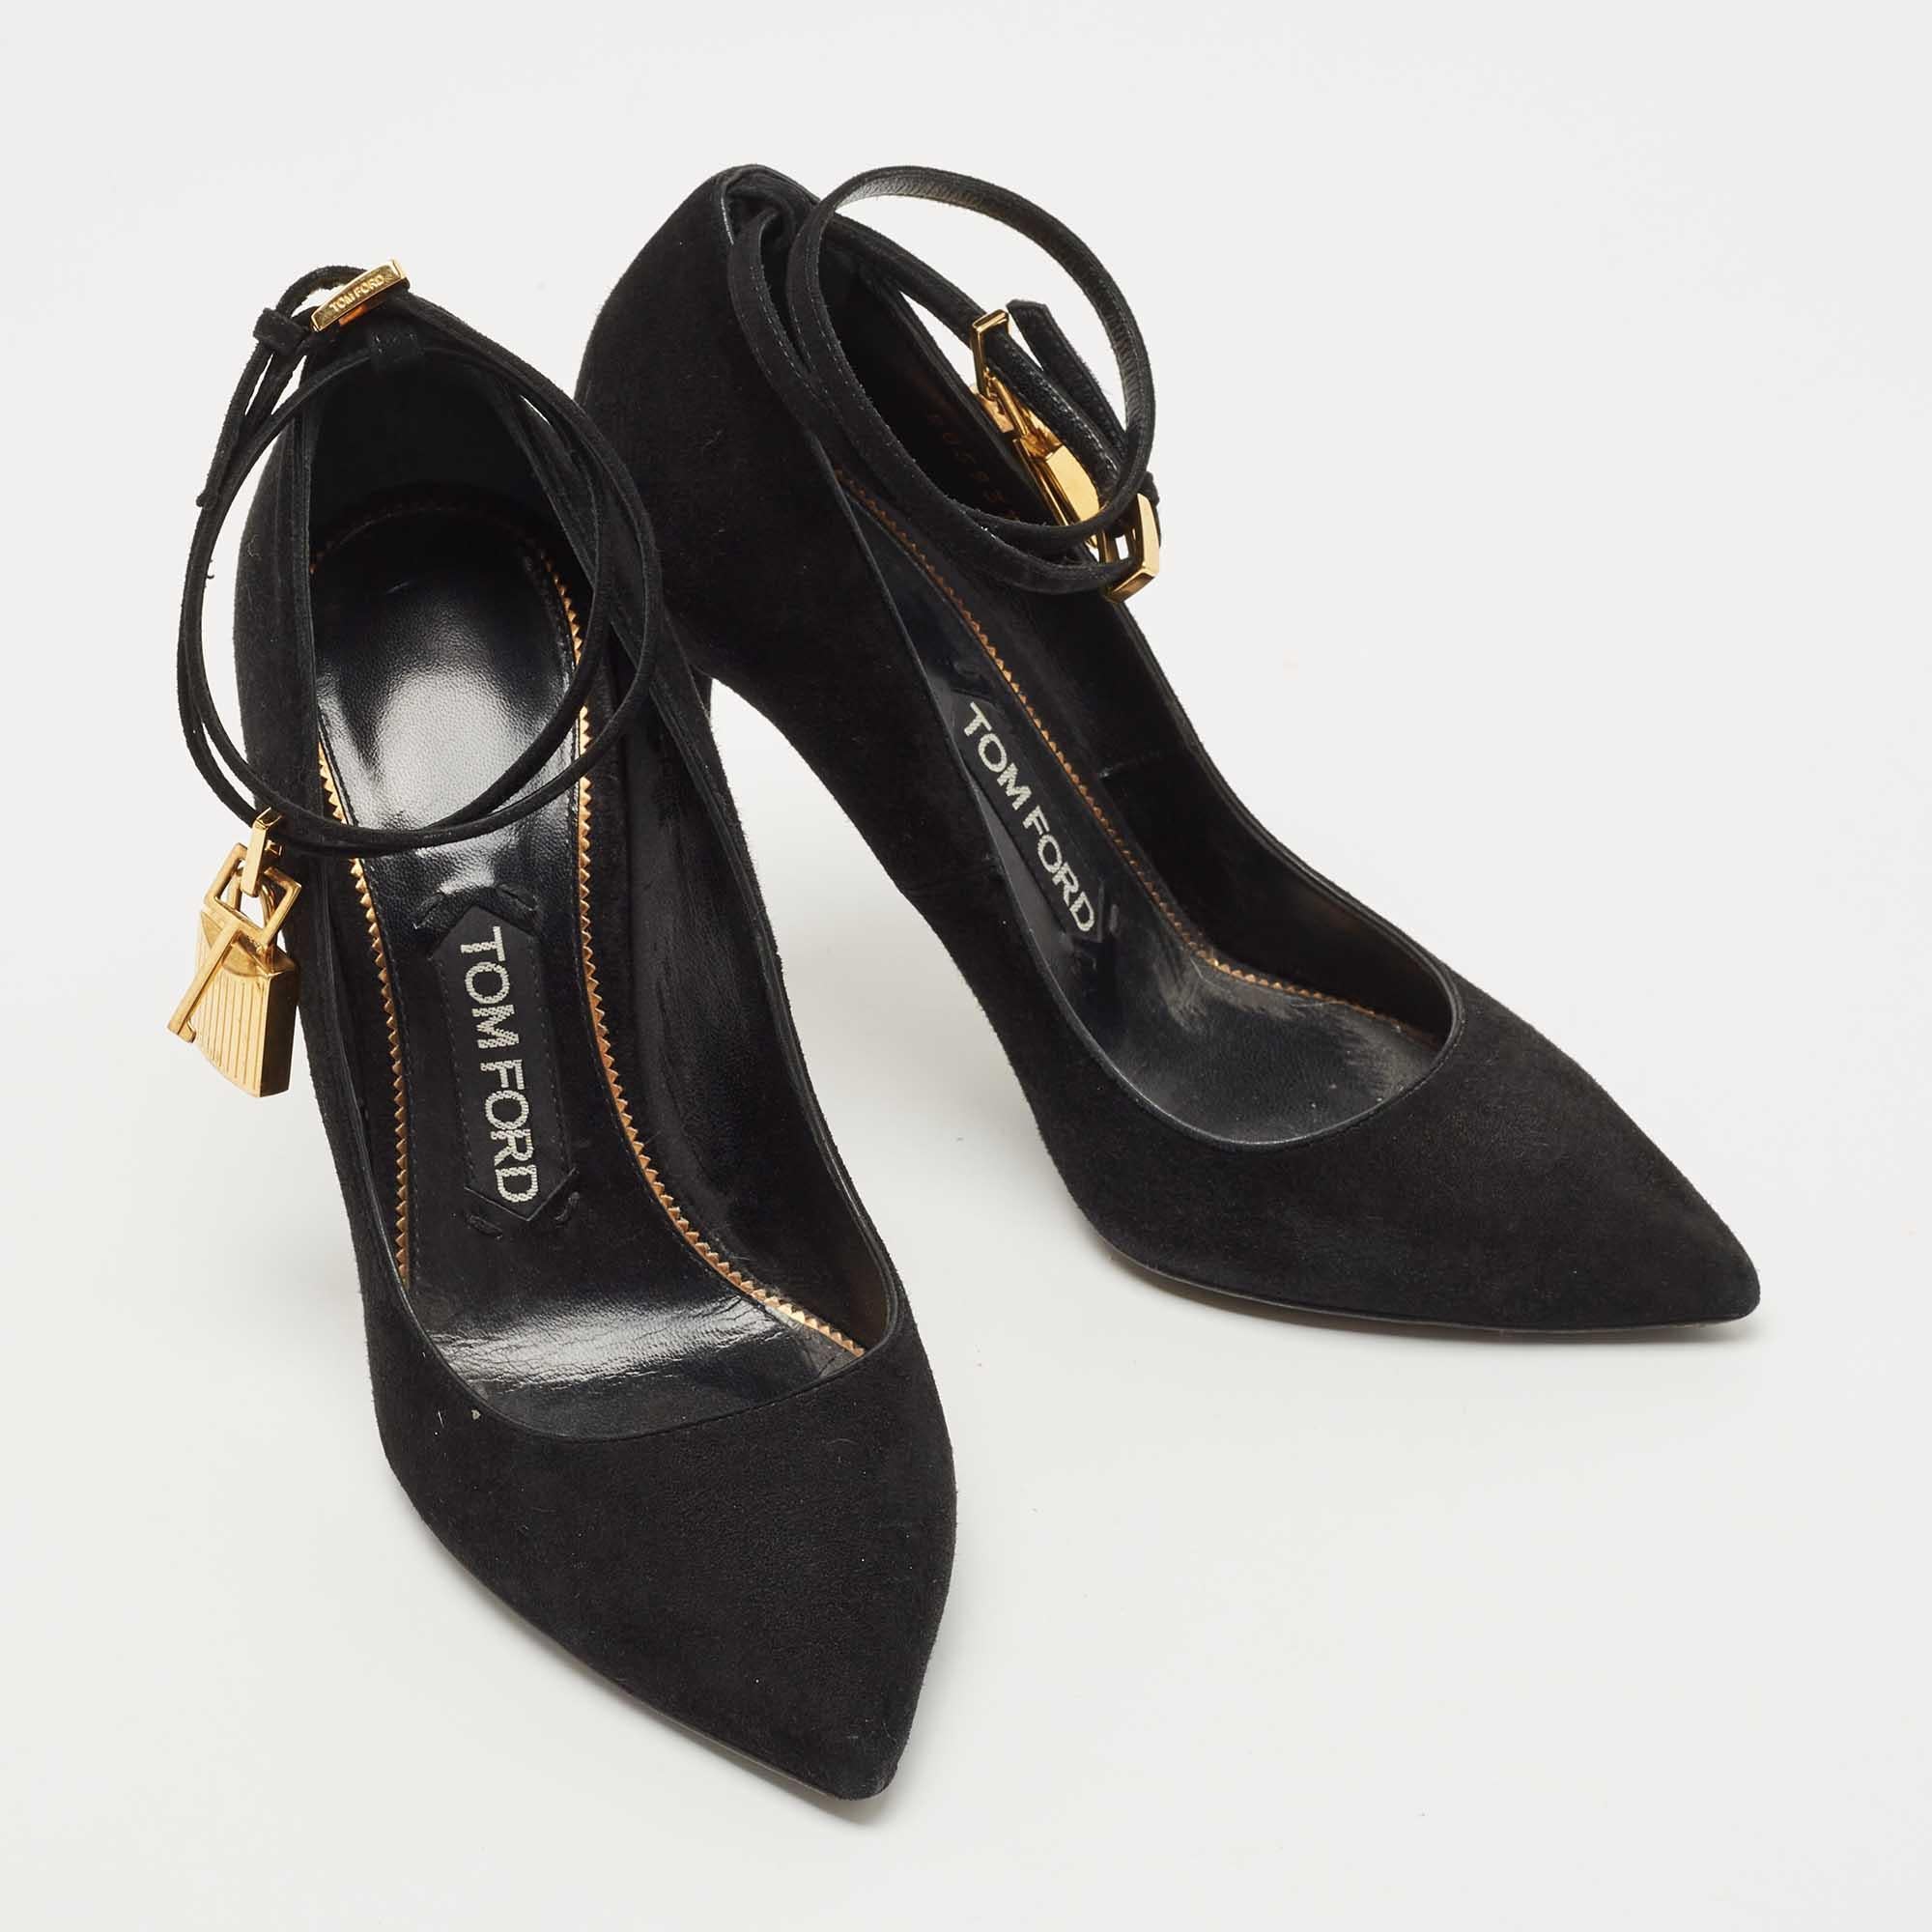 Tom Ford Black Suede Padlock Ankle Wrap Pumps Size 36.5 1